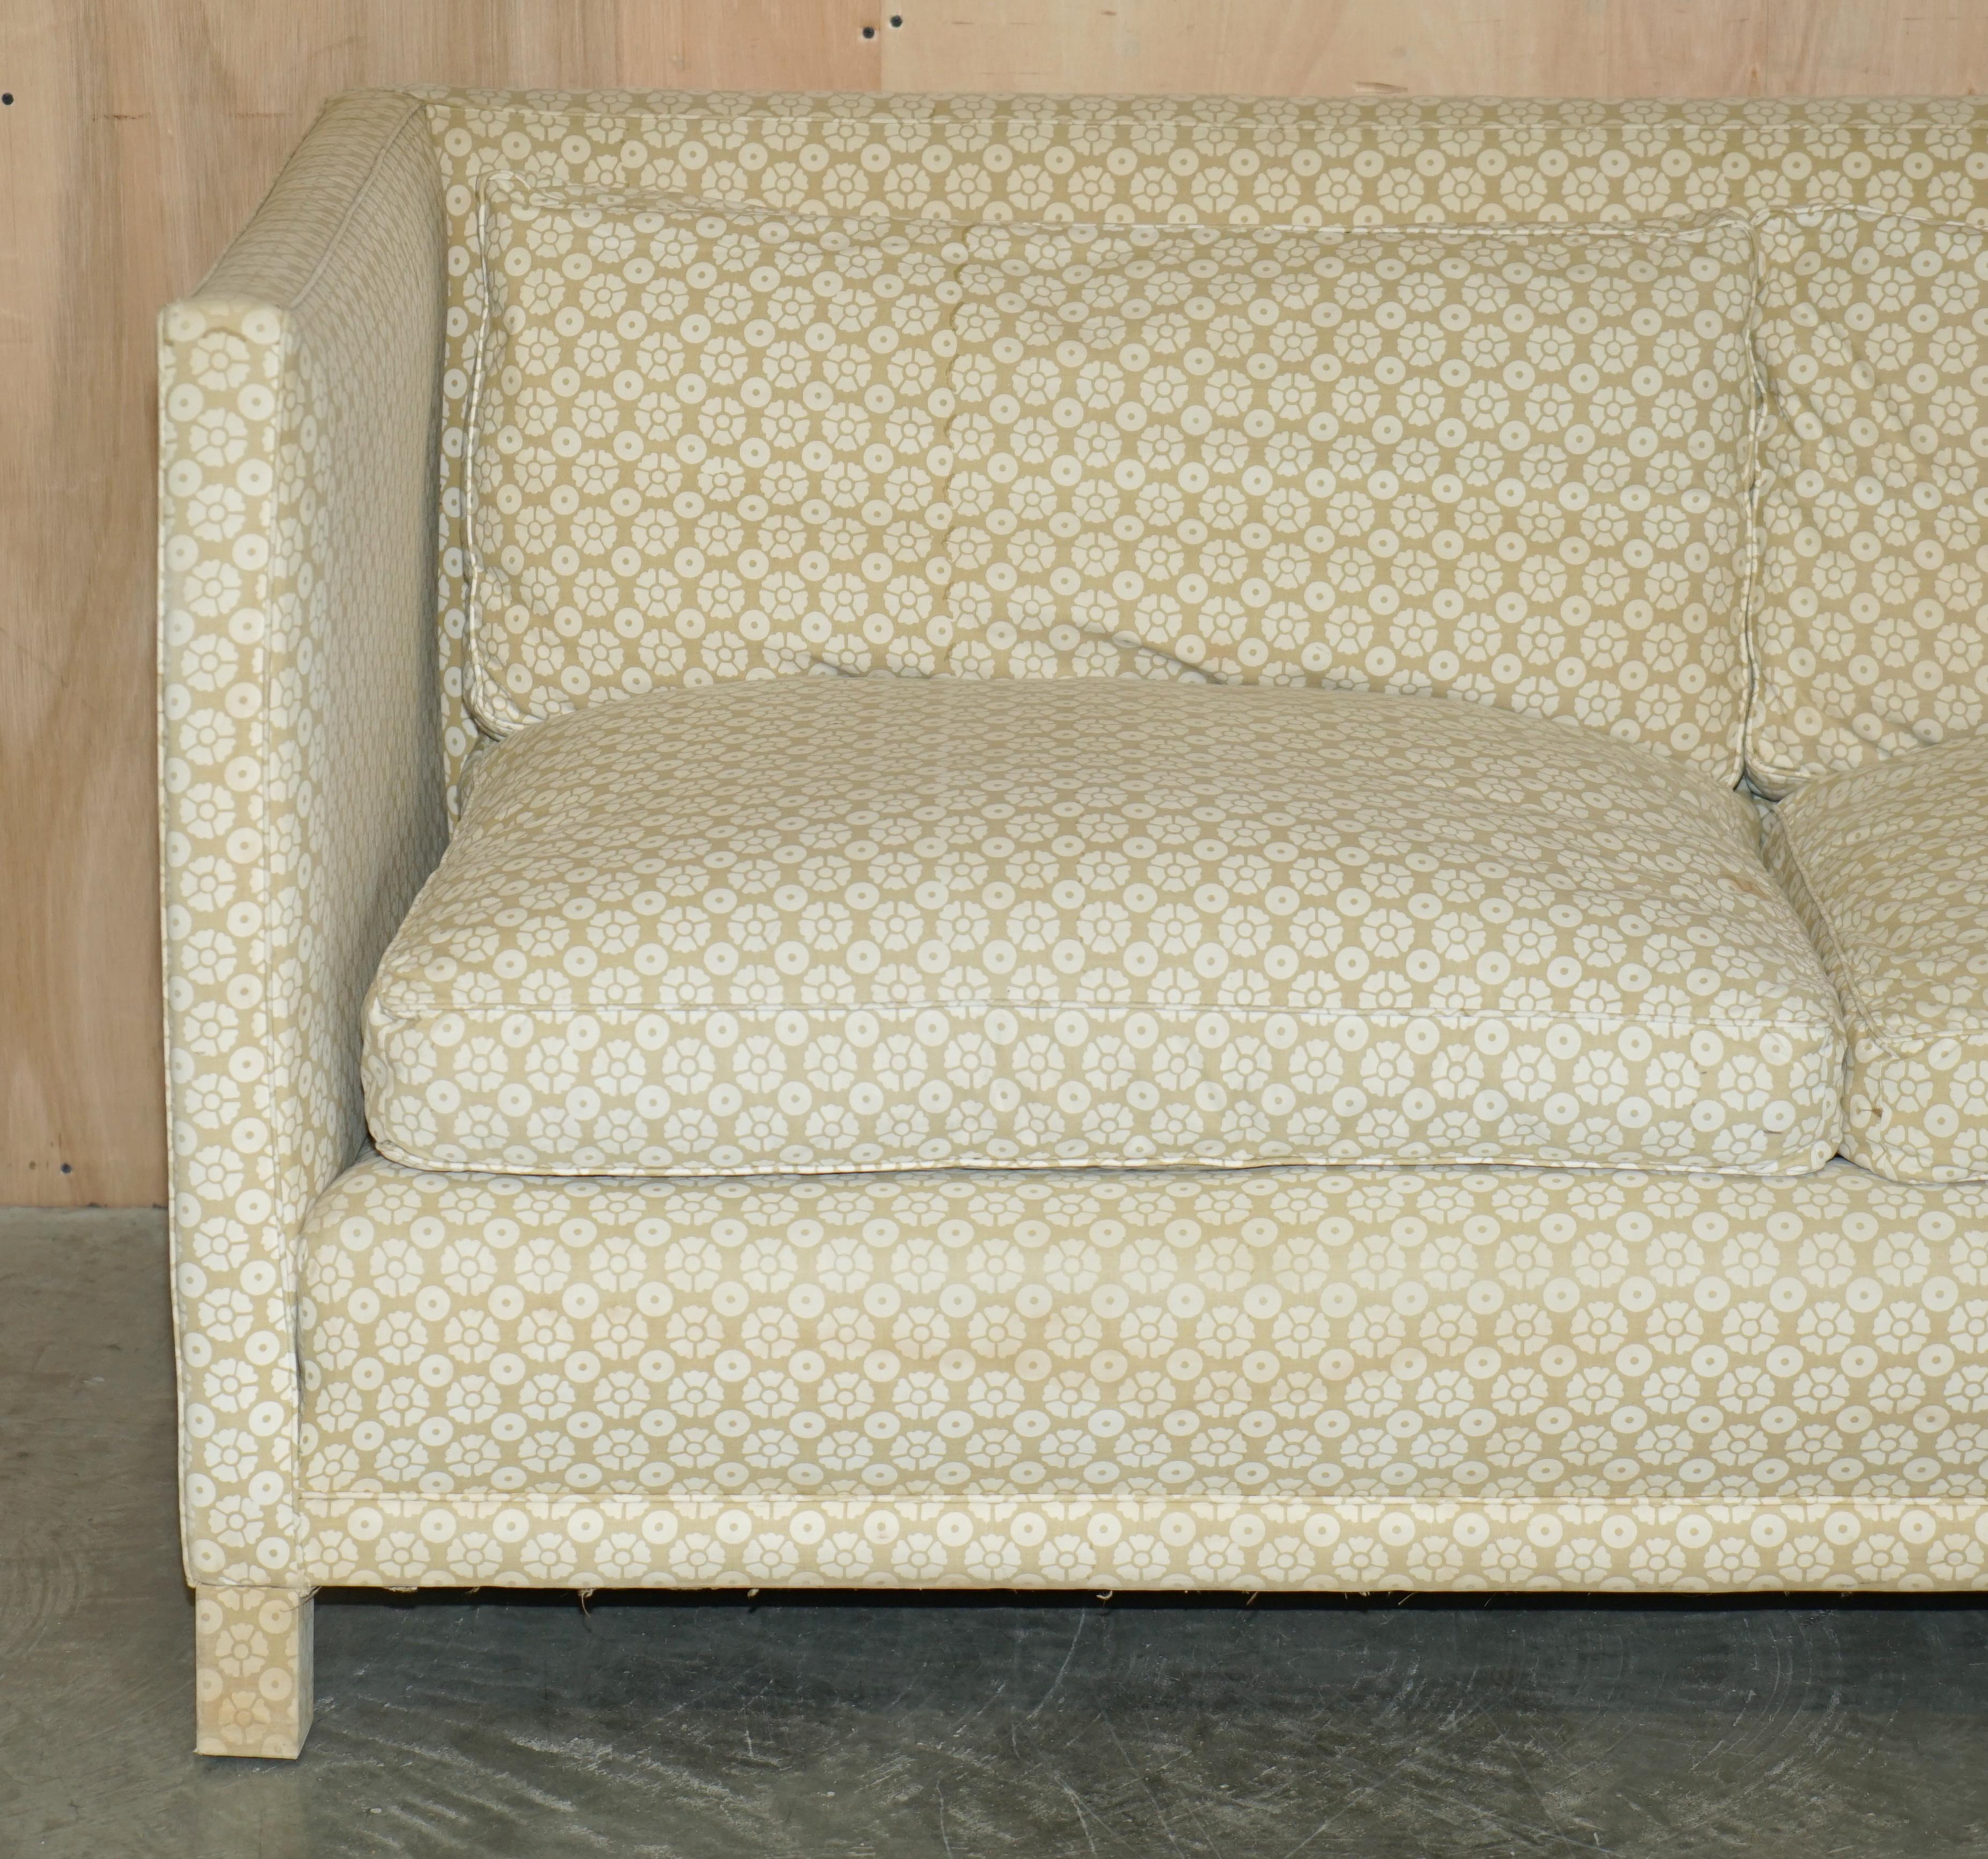 Royal House Antiques

Royal House Antiques is delighted to offer for sale one of two, very rare and important original 1969 David Hicks Paire De Canapes, Vers sofas in the original ticking fabric

Please note the delivery fee listed is just a guide,